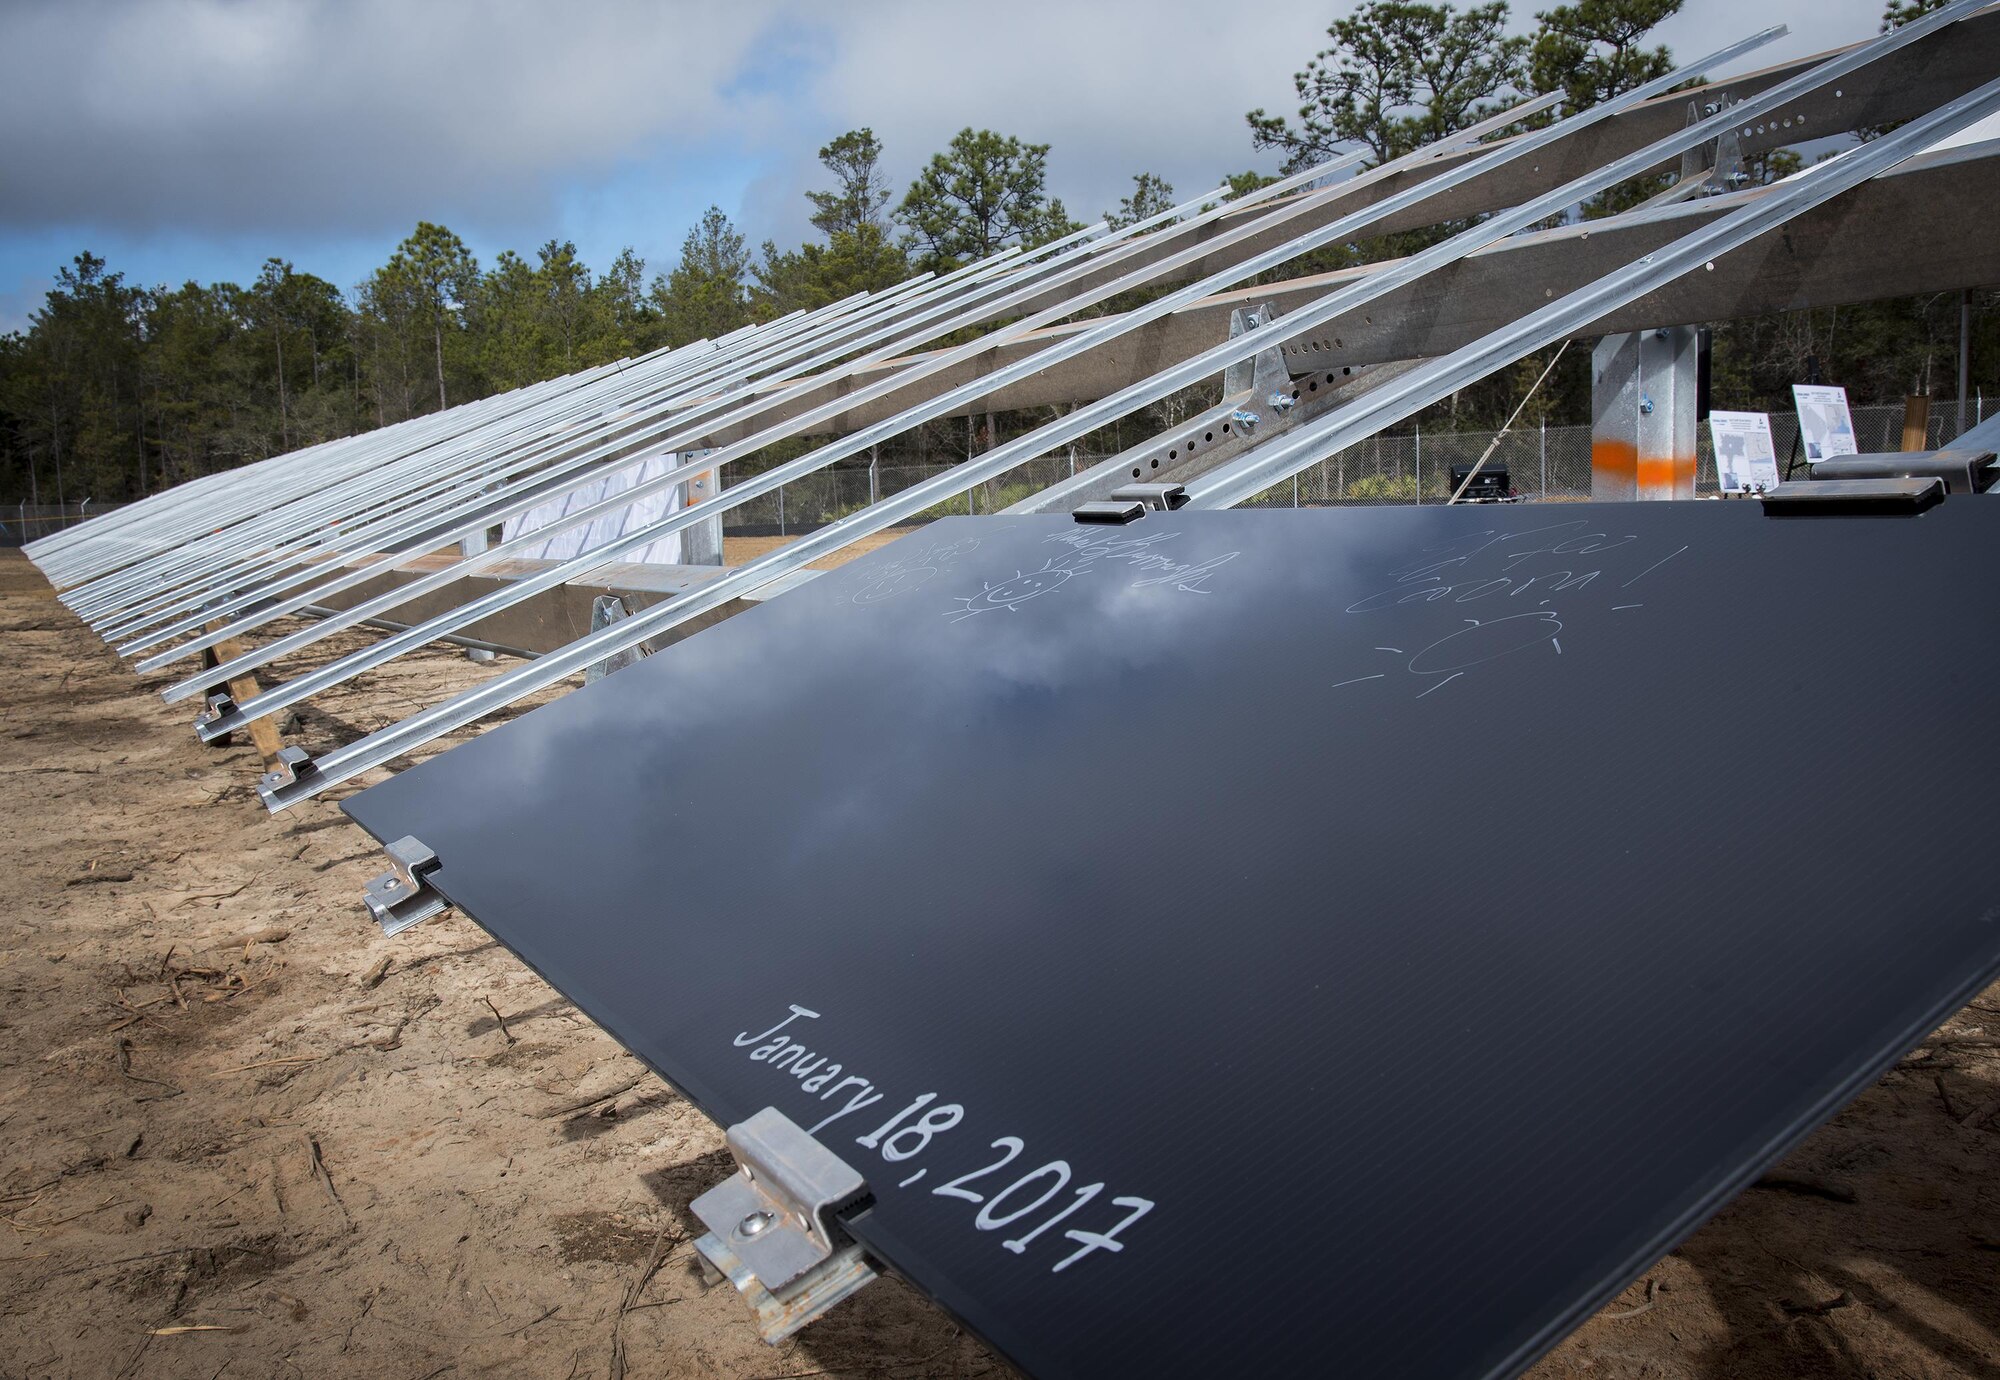 The first of the eventual 375,000 solar panels sits on it rack after a ceremonial initial installation ceremony Jan. 18 at Eglin Air Force Base, Fla.  Leaders from the three project partners, Air Force, Gulf Power and Coronal Development Services, were on hand to install the first panel located on the 240-acre site.  (U.S. Air Force photo/Samuel King Jr.)